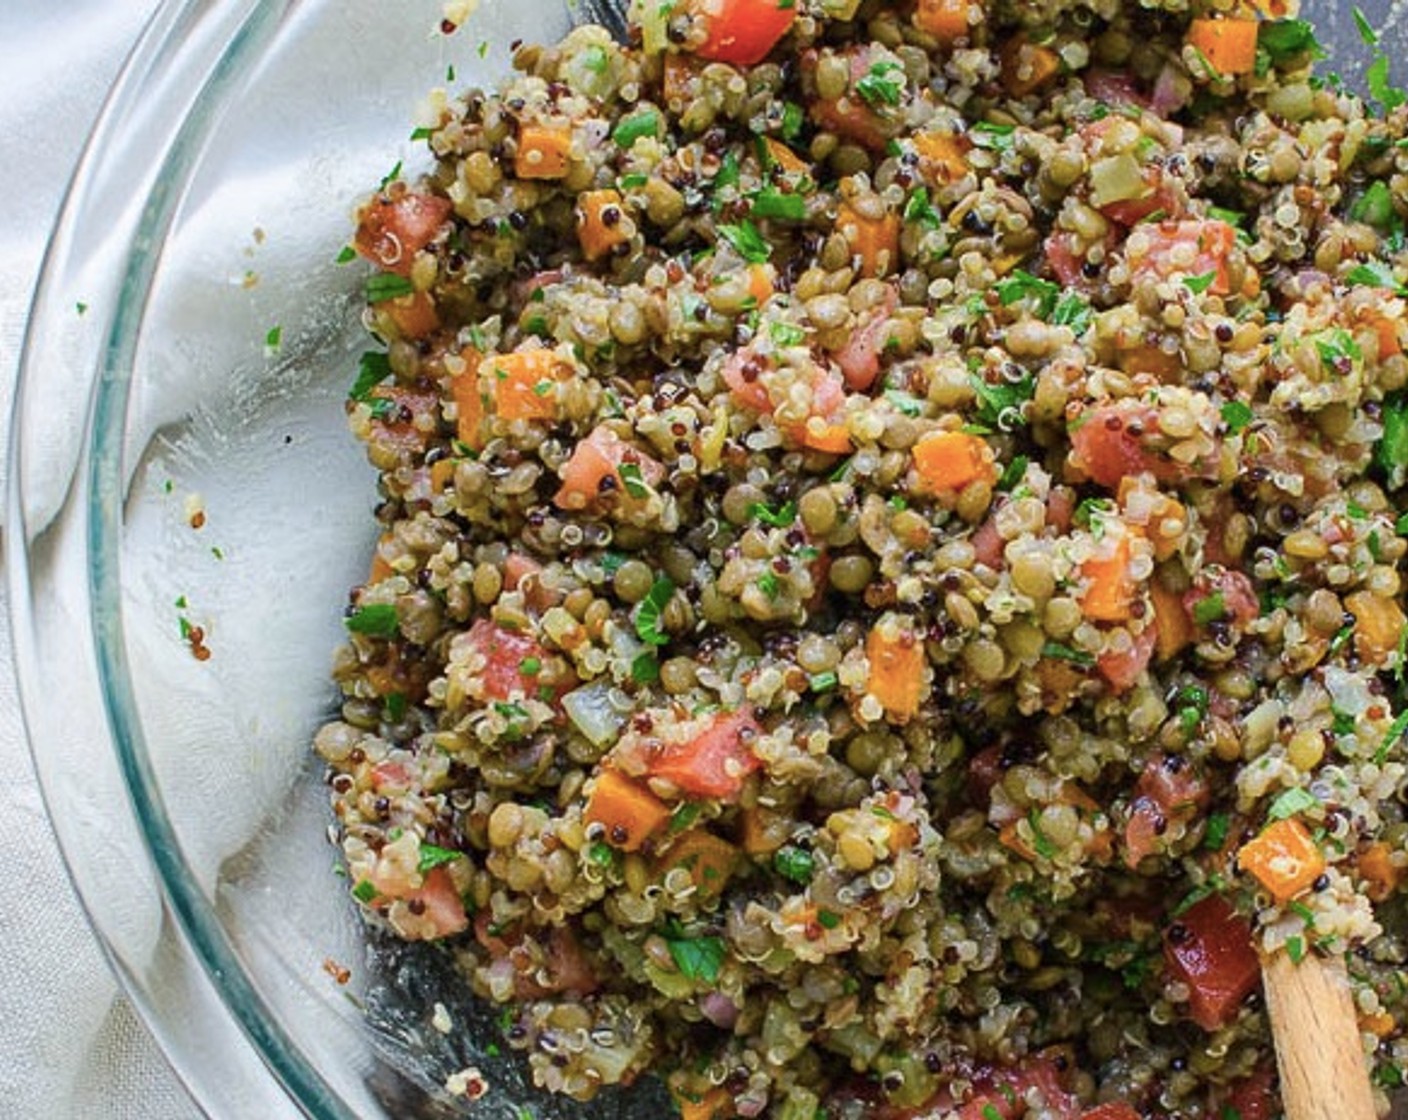 step 7 In a large bowl, combine lentils, quinoa, diced plum tomato, and parsley, and toss to combine. Add 3 tablespoons of shallots vinaigrette and toss. Taste, and add more vinaigrette as needed. Serve warm, or at room temperature.